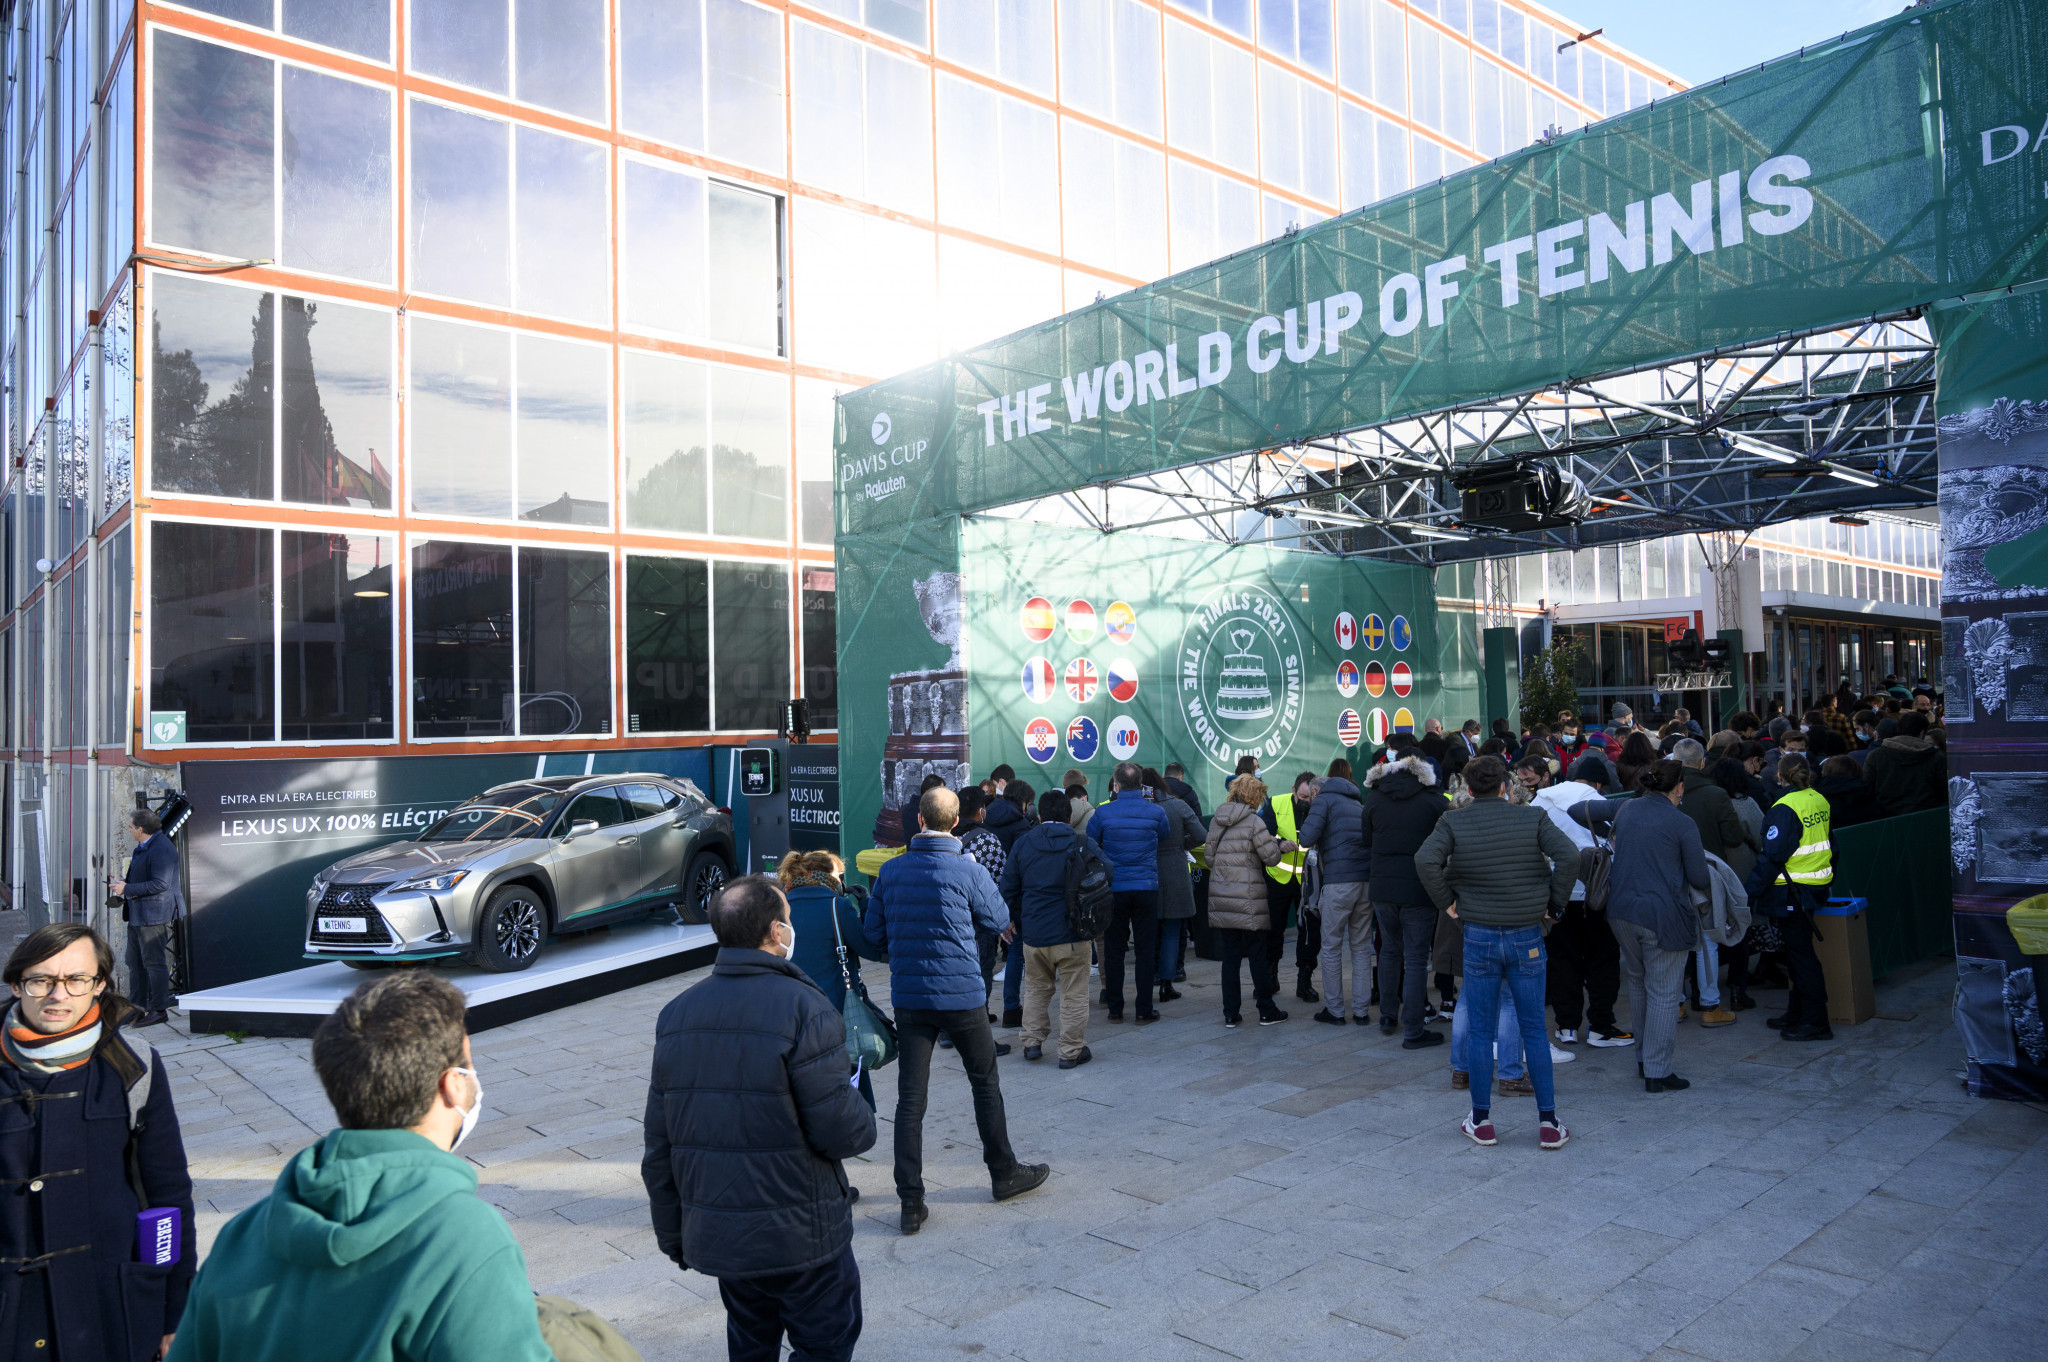 Host cities for group stages of Davis Cup Tennis Finals announced